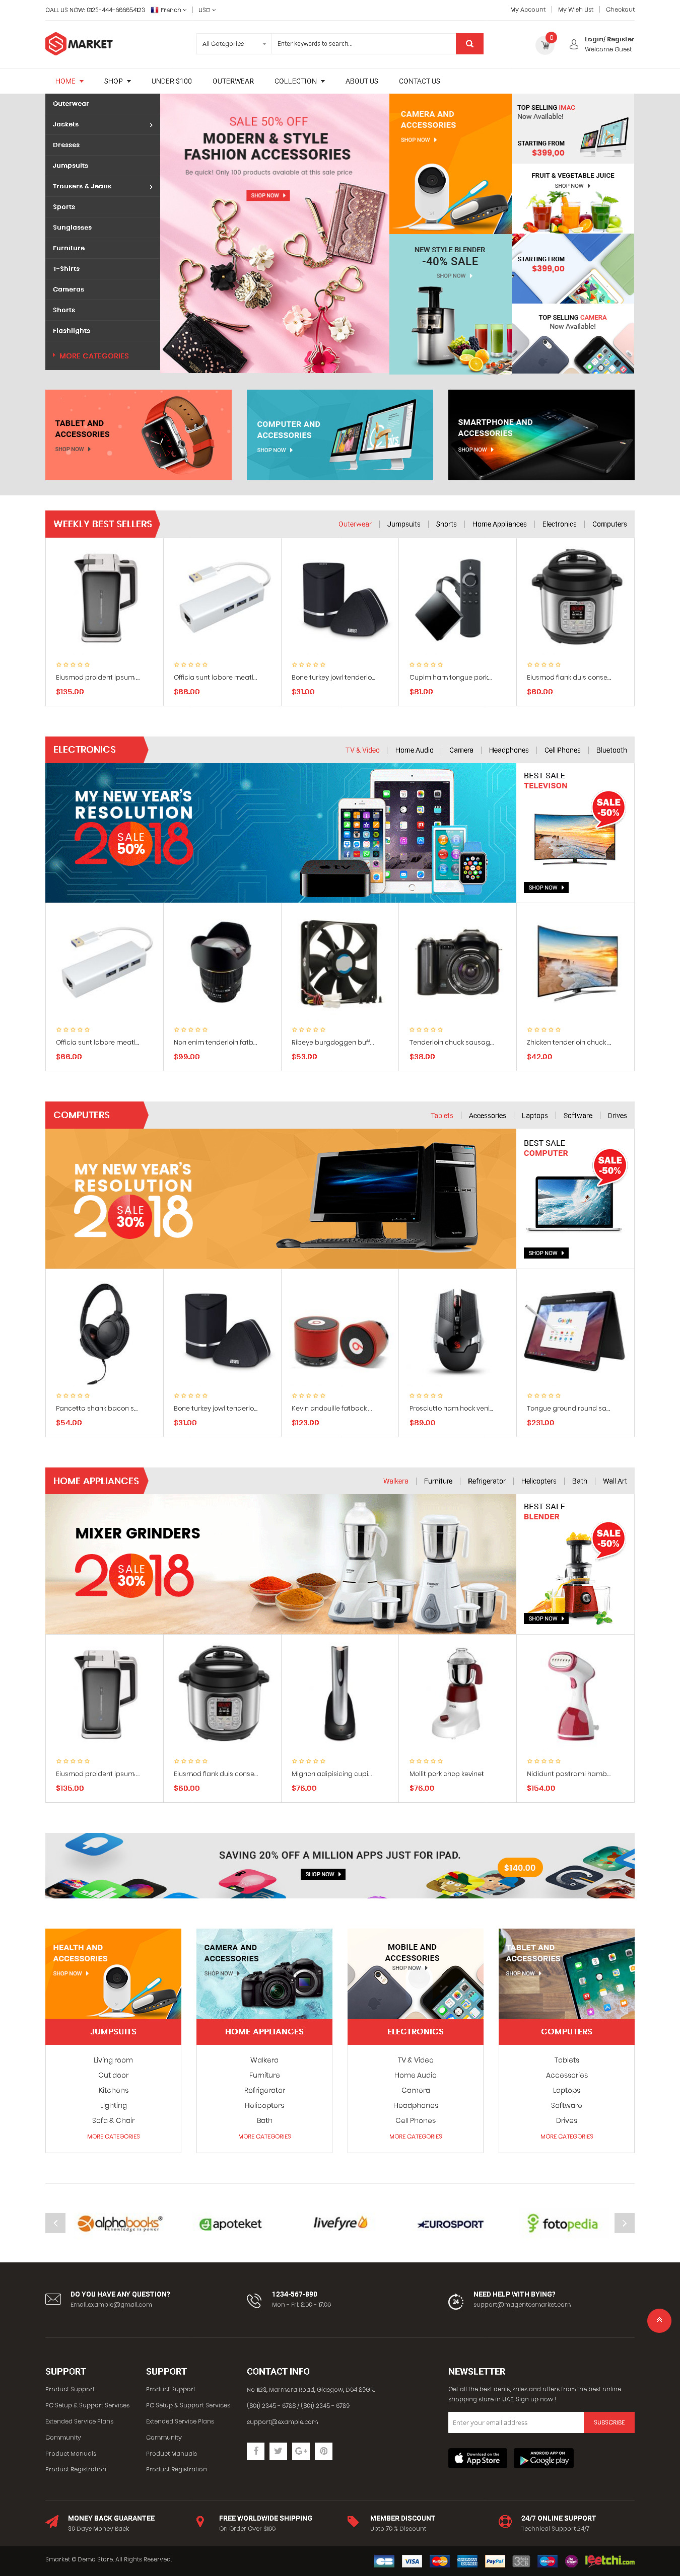 Top 5 Magento Themes for Large Inventory Stores - SM Smarket - Fluid Responsive Magento 2.2 MultiPurpose Theme